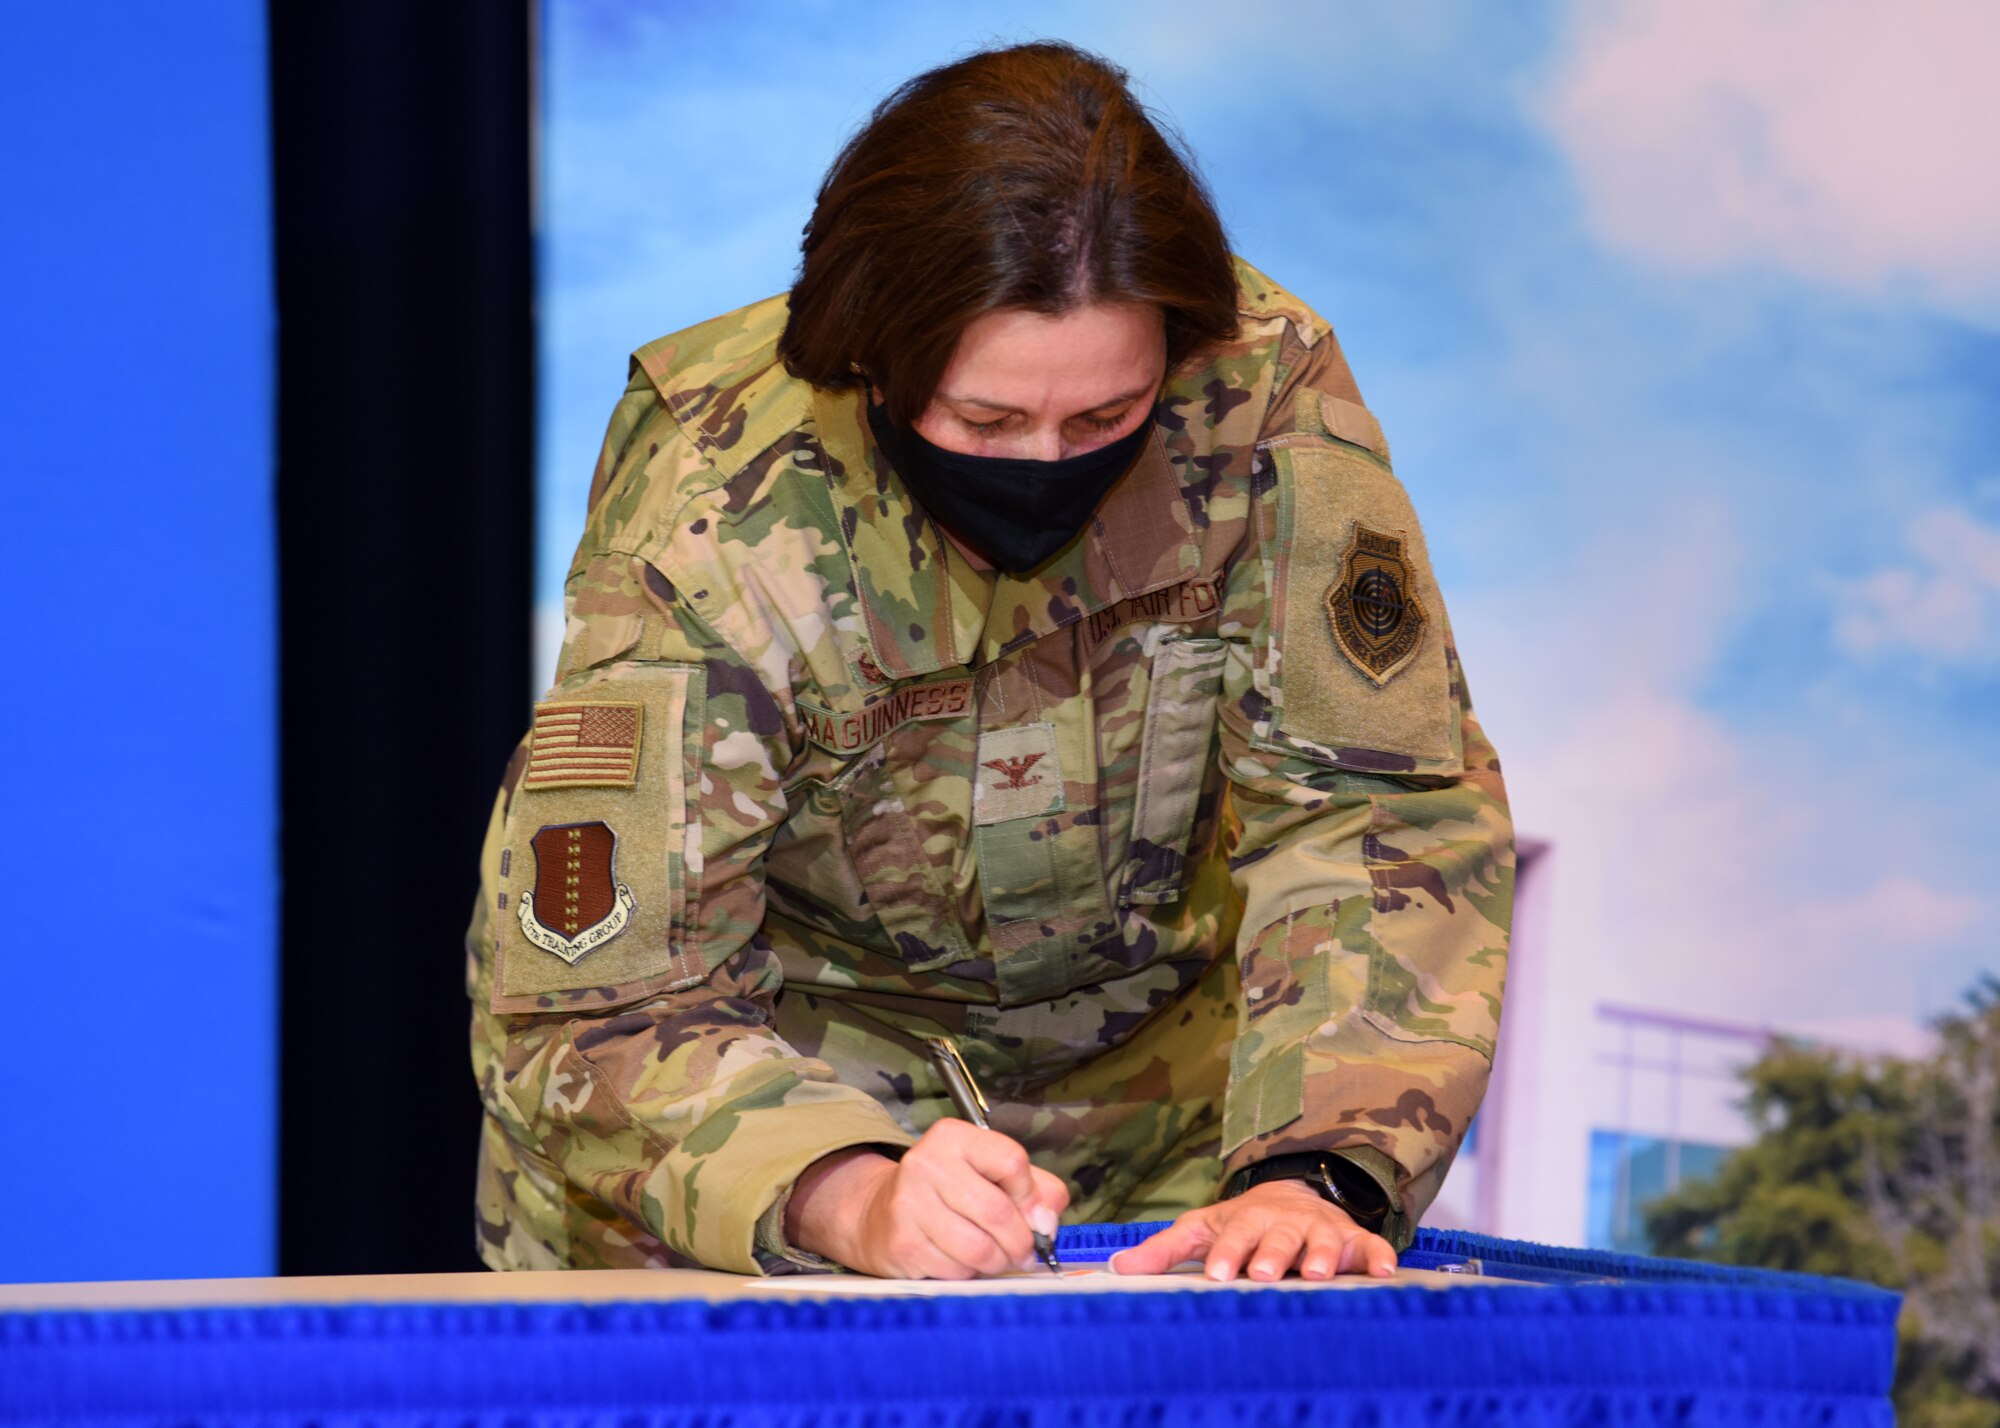 U.S. Air Force Col. Angelina Maguinness, 17th Training Group commander, signs the Memorandum of Understanding between Angelo State University and Goodfellow Air Force Base during the transfer agreement signing at the Houston Harte University Center, Nov. 13, 2020. Maguinness’ team worked the agreement with ASU over the course of five years. (U.S. Air Force photo by Airman 1st Class Ethan Sherwood)